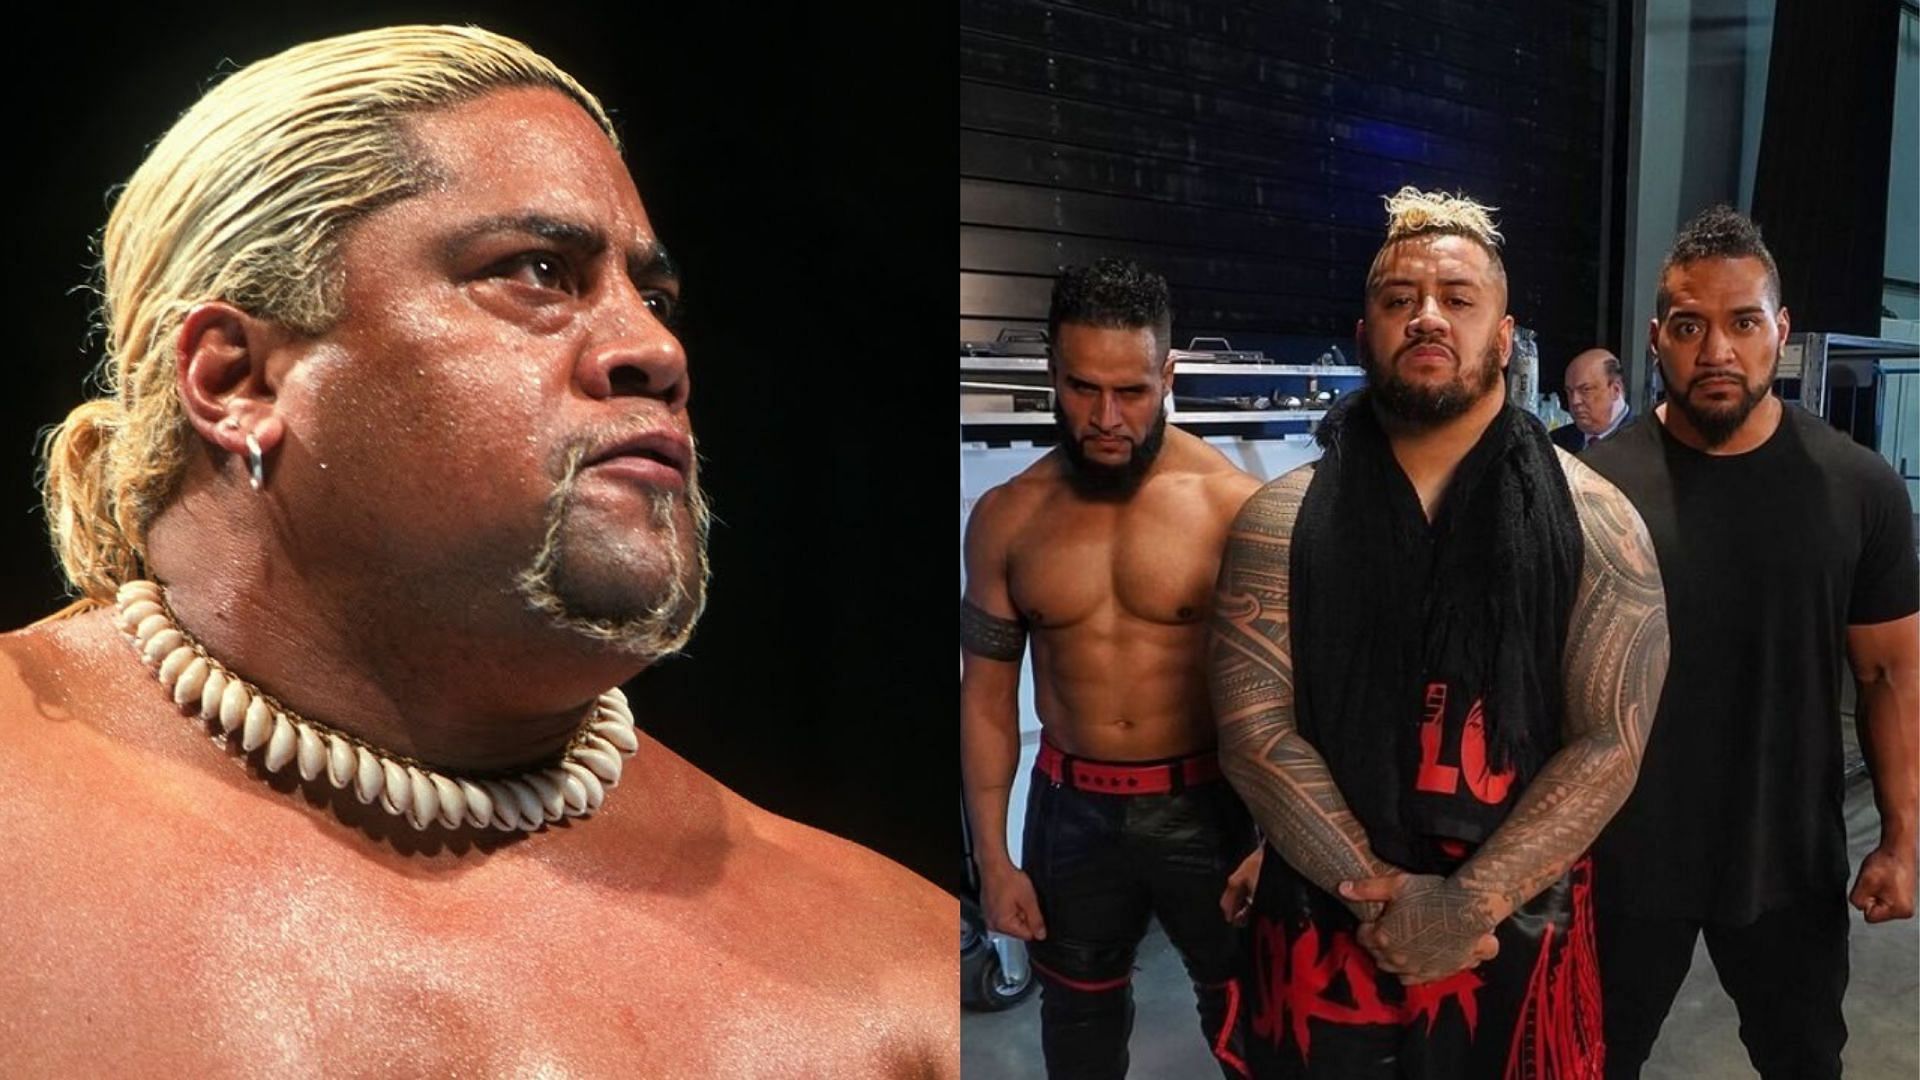 Rikishi (left) and the new Bloodline (right) [Photo Credits: WWE.com and WWE on Instagram]